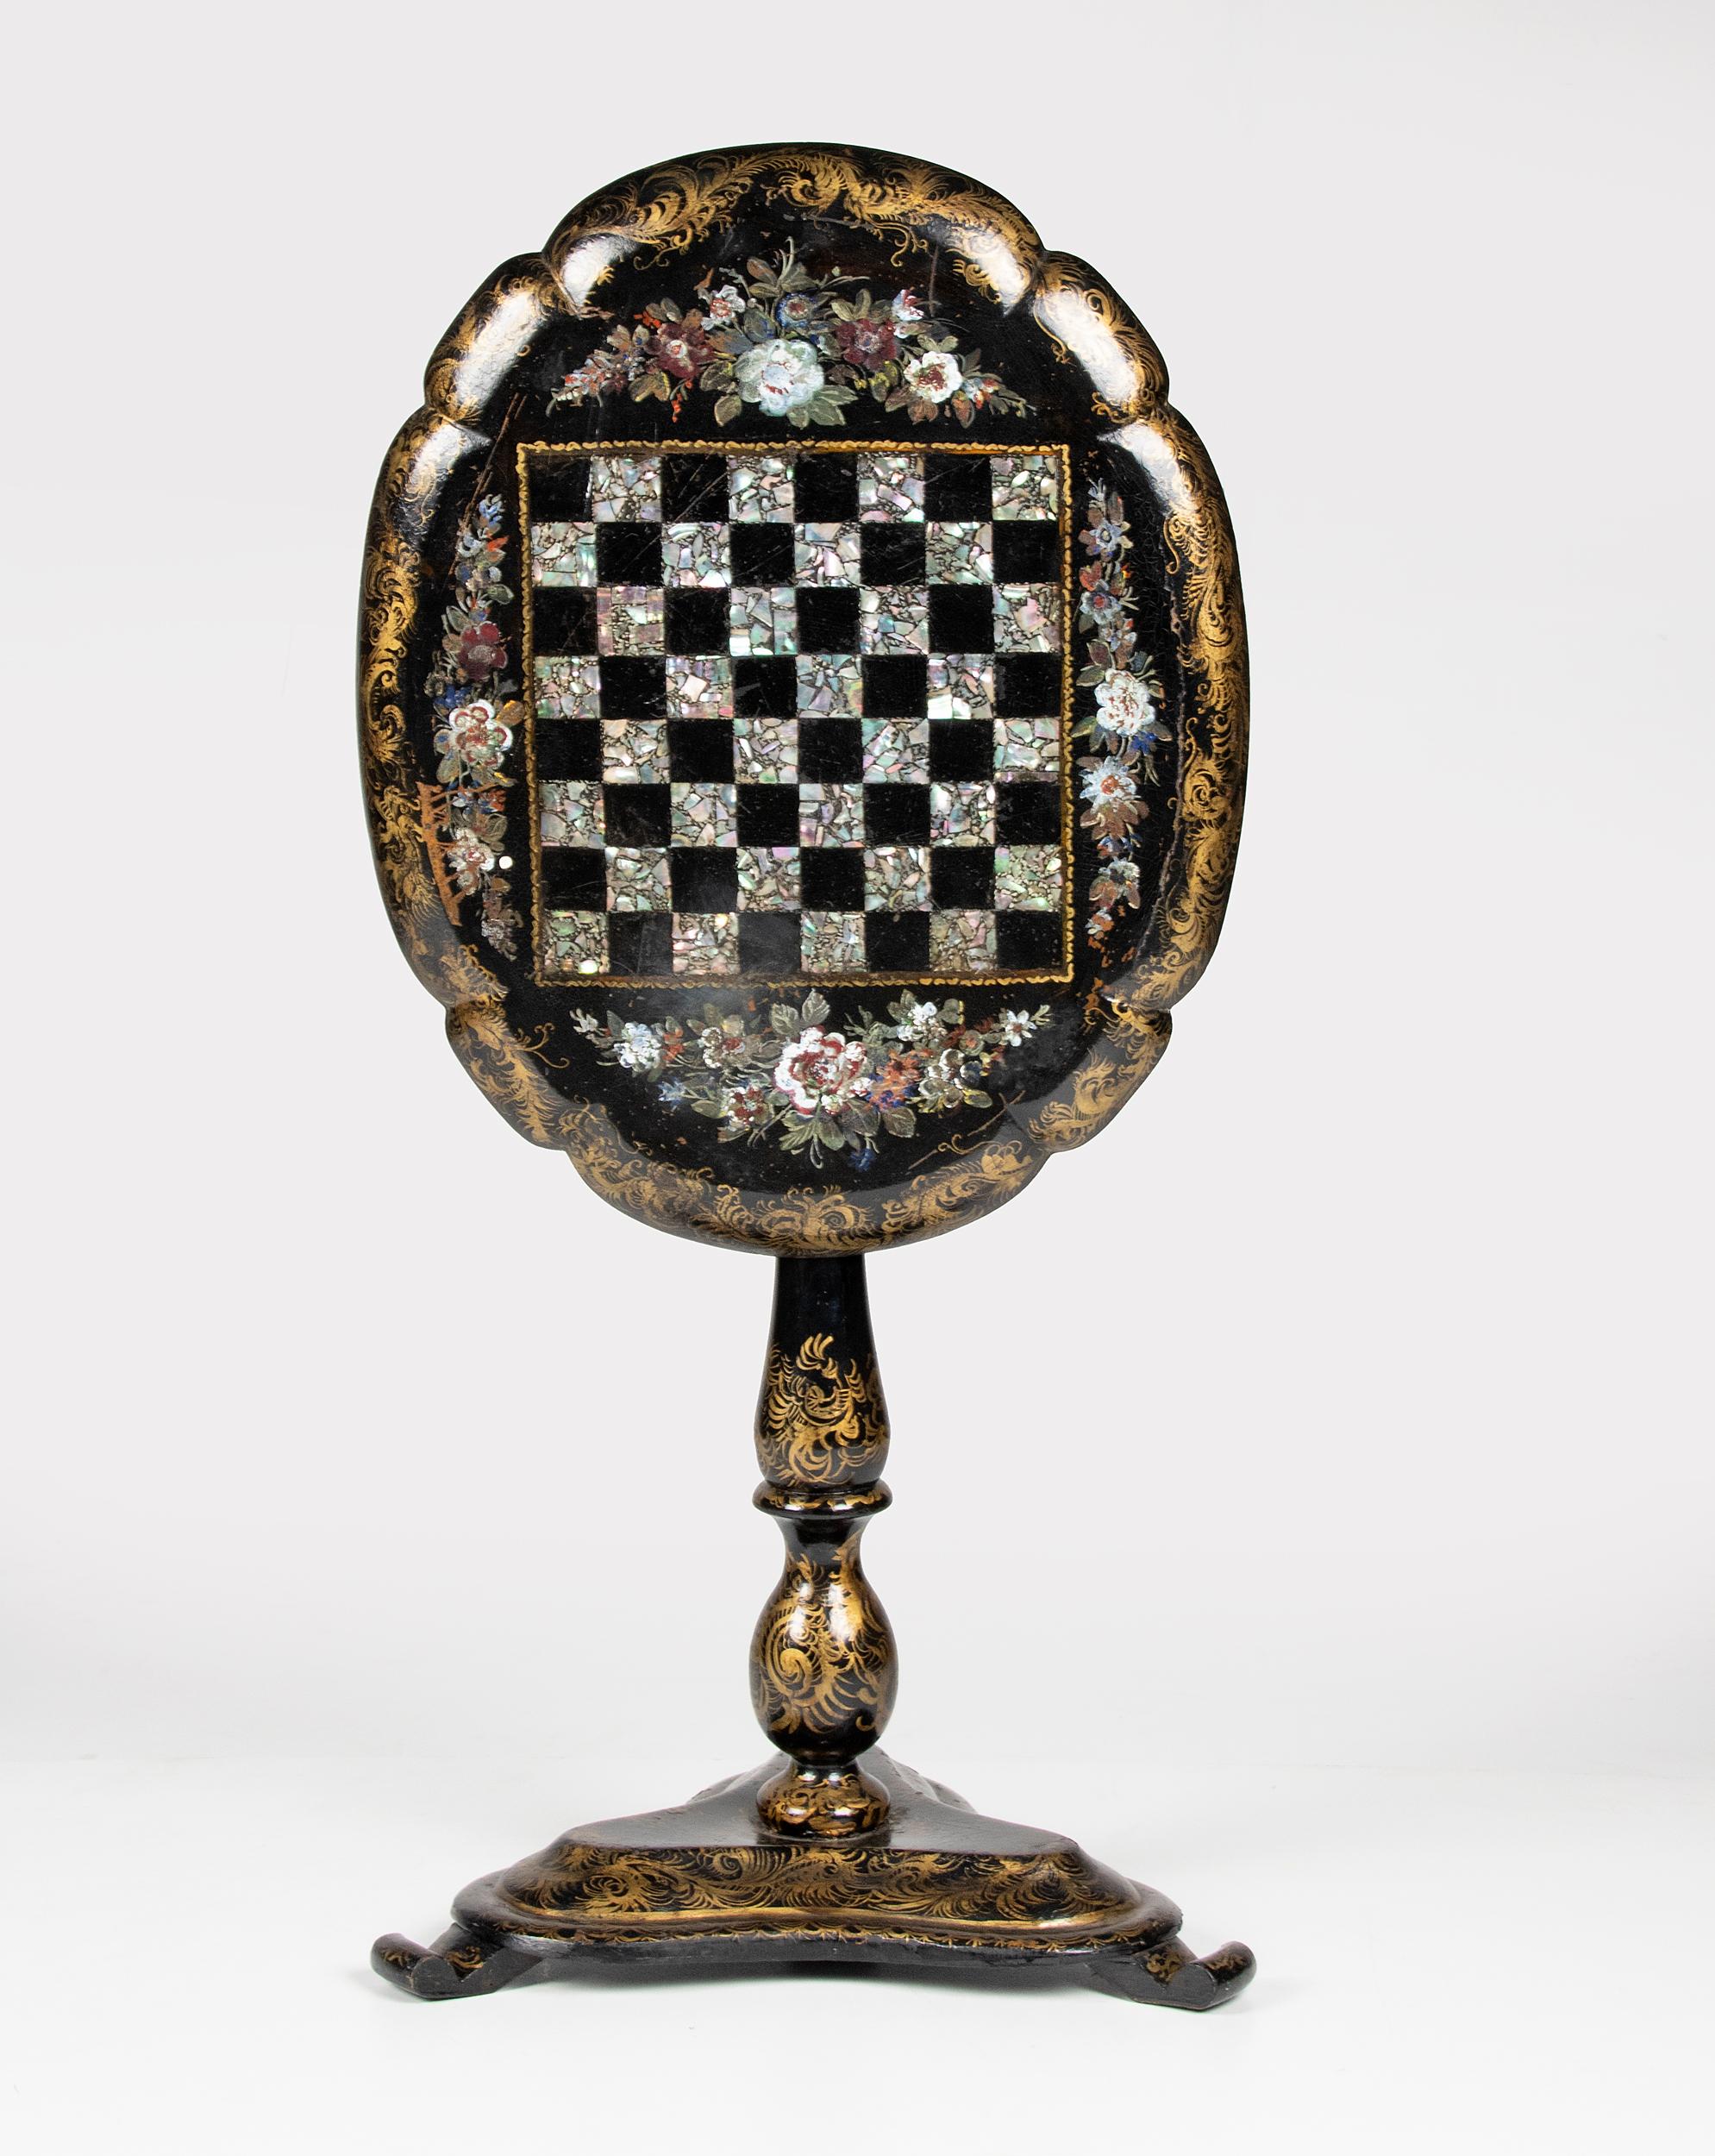 Beautiful Victorian chess table. It is a tilt top model, the top can be folded up. The table is made of black lacquered wood and papier mâché. It is inlaid with delicate pieces of mother of pearl and painted with floral and gold decorations. The